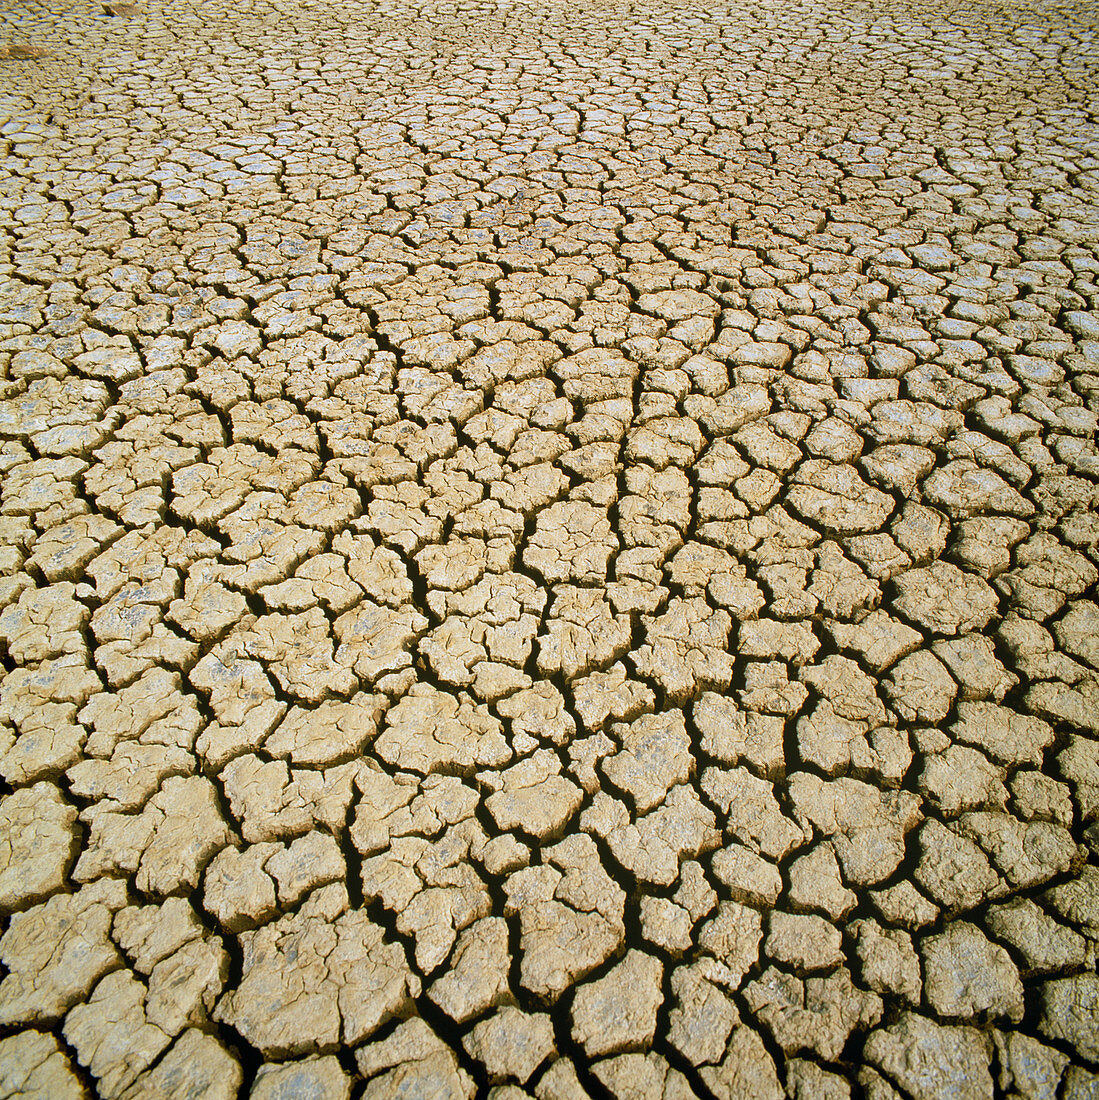 Mud cracking during a drought